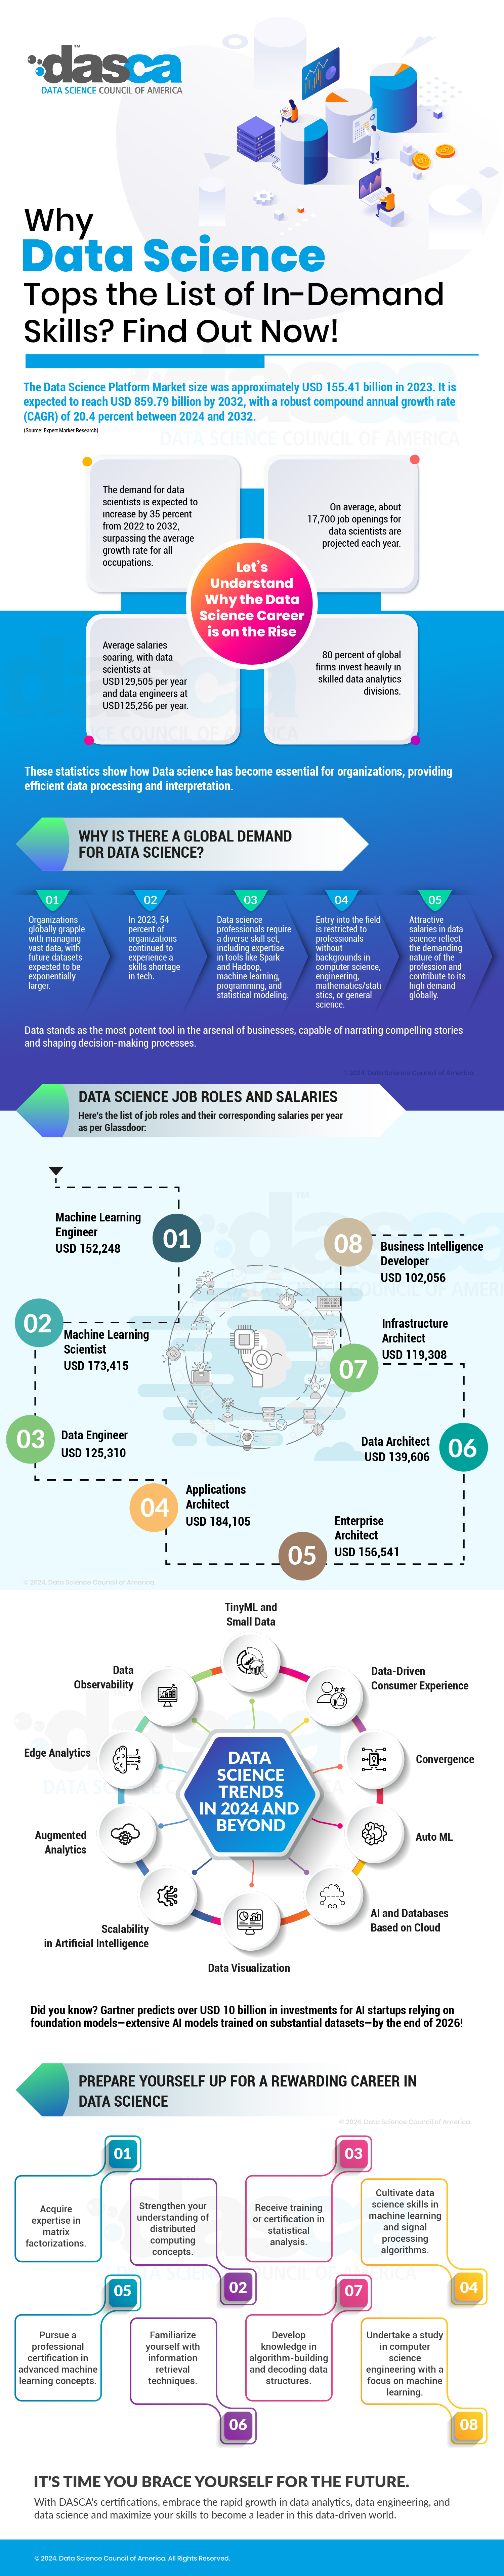 Why Data Science Tops the List of In-Demand Skills Find Out Now